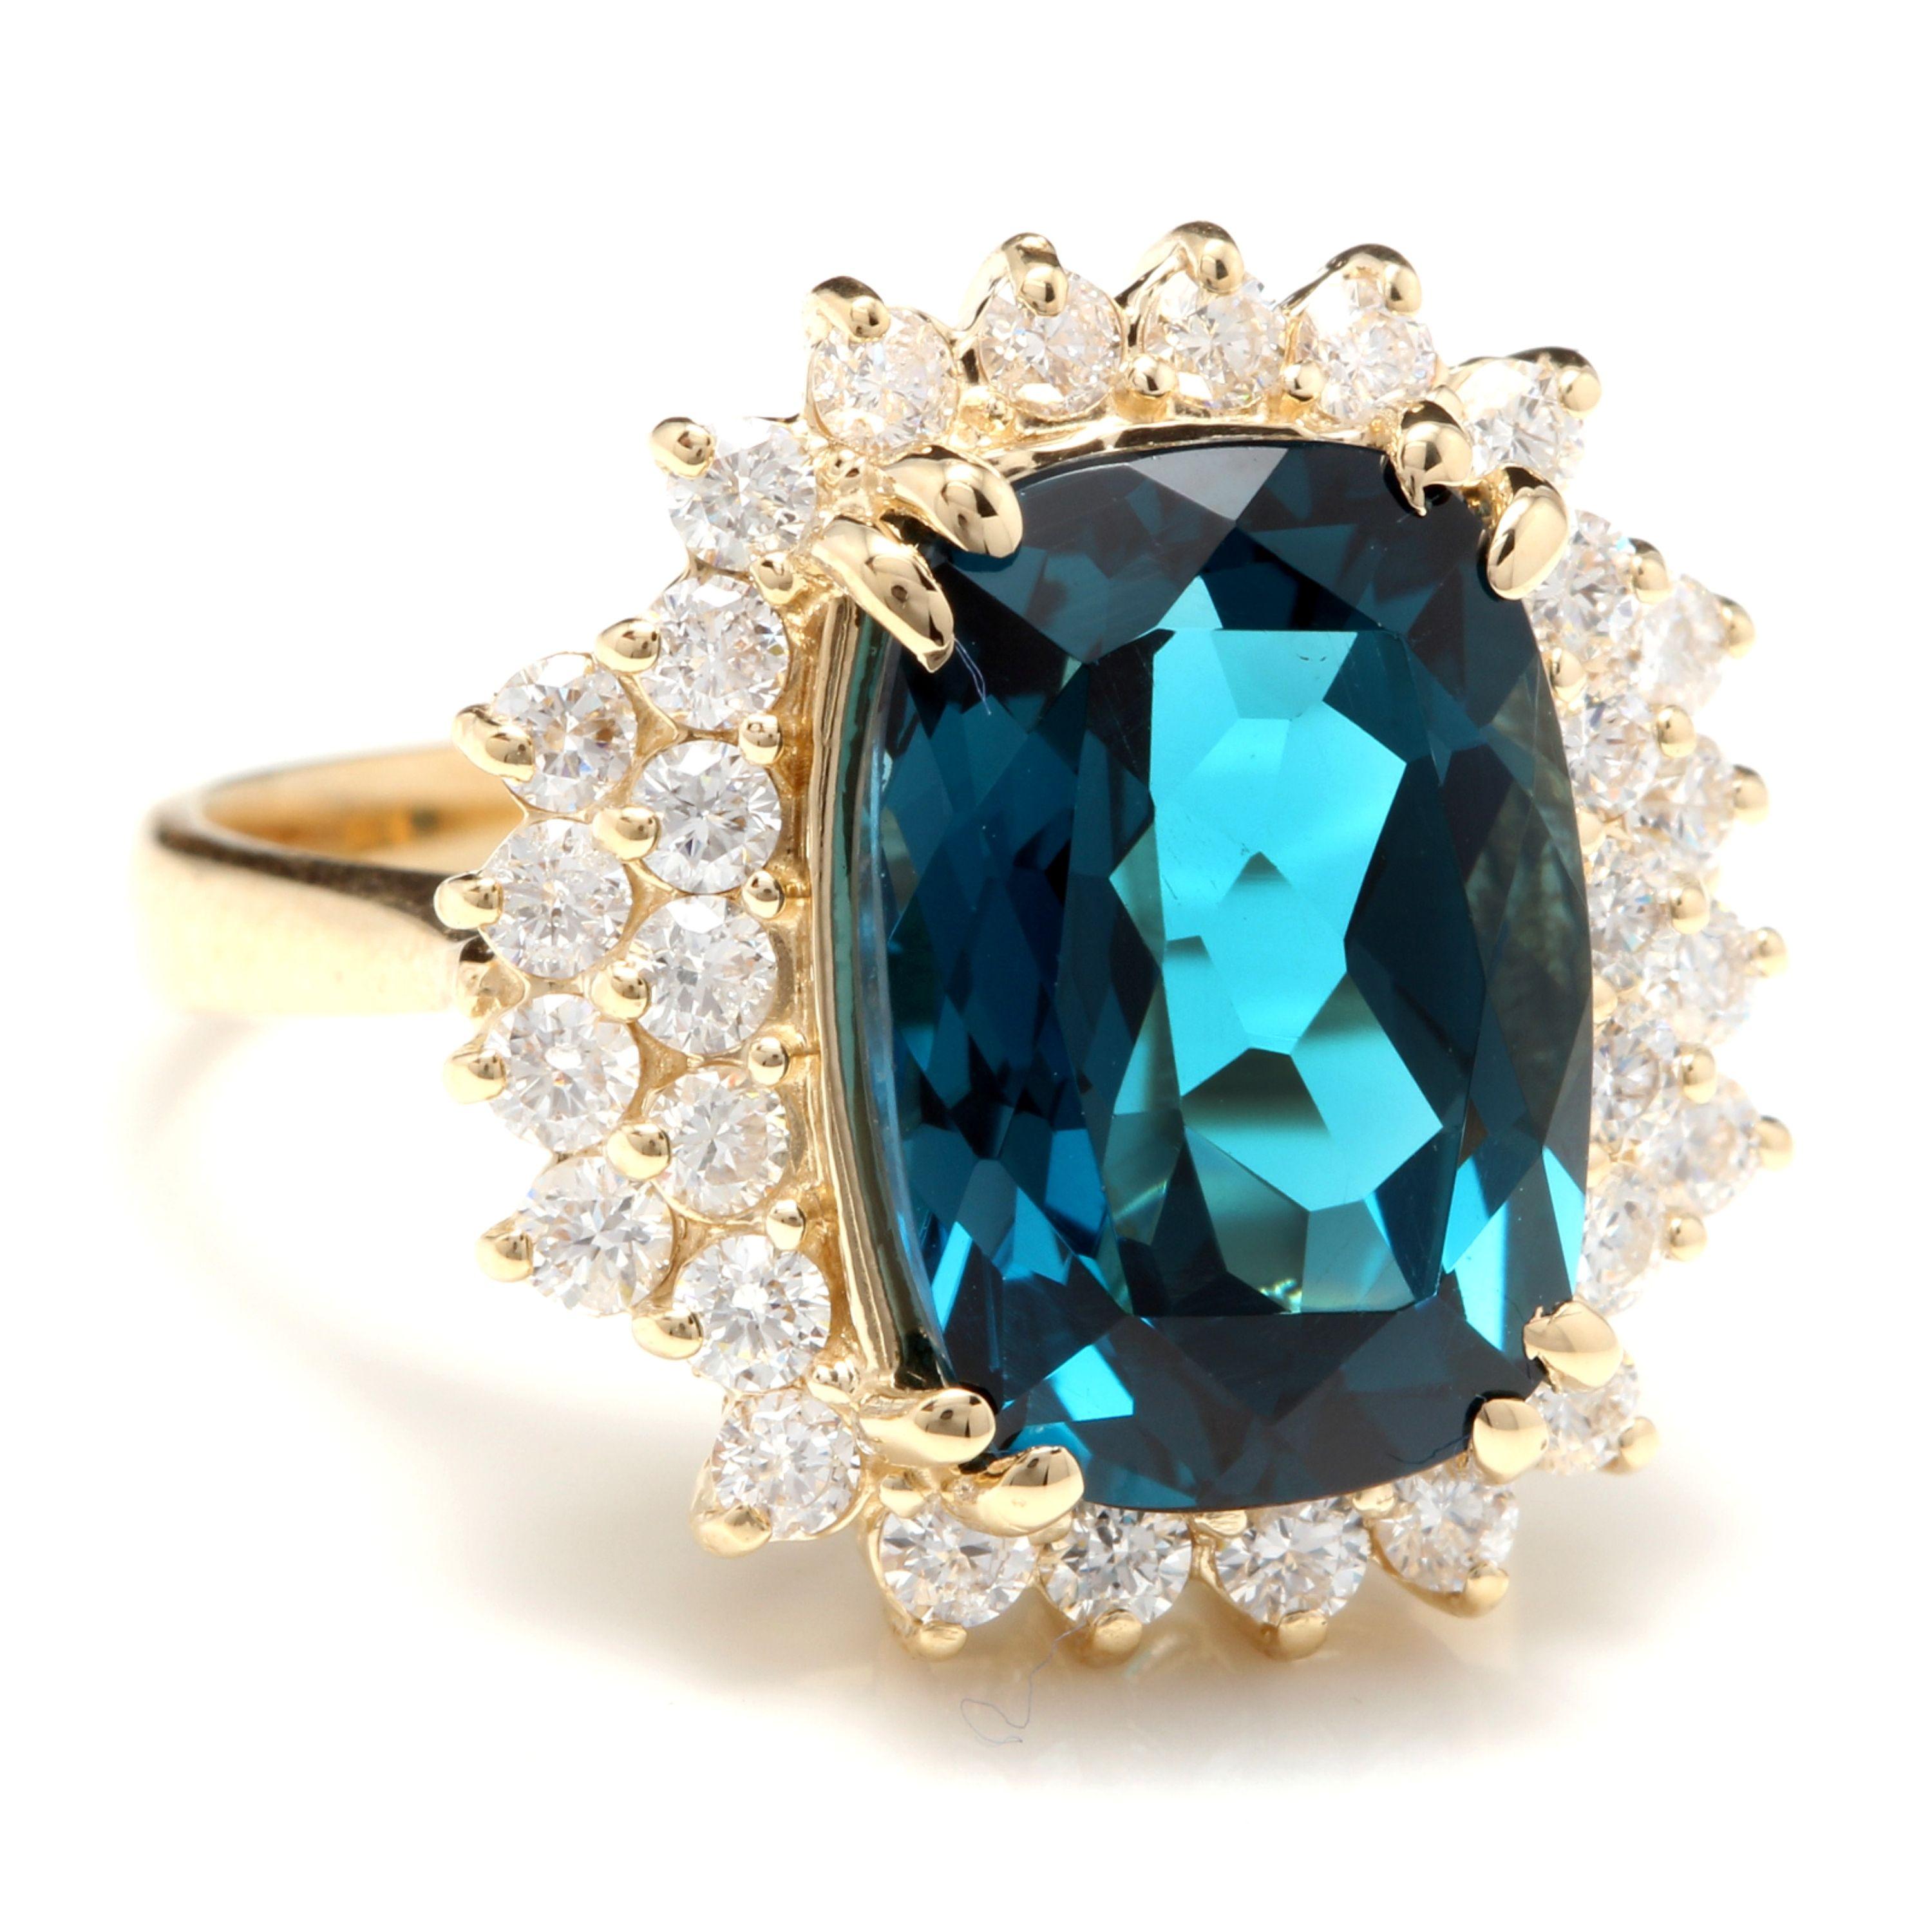 10.15 Carats Natural Impressive LONDON BLUE TOPAZ and Diamond 14K Yellow Gold Ring

Total Natural London Blue Topaz Weight: Approx. 9.00 Carats

London Blue Topaz Measures: Approx. 14 x 10mm

Natural Round Diamonds Weight: Approx. 1.15 Carats (color